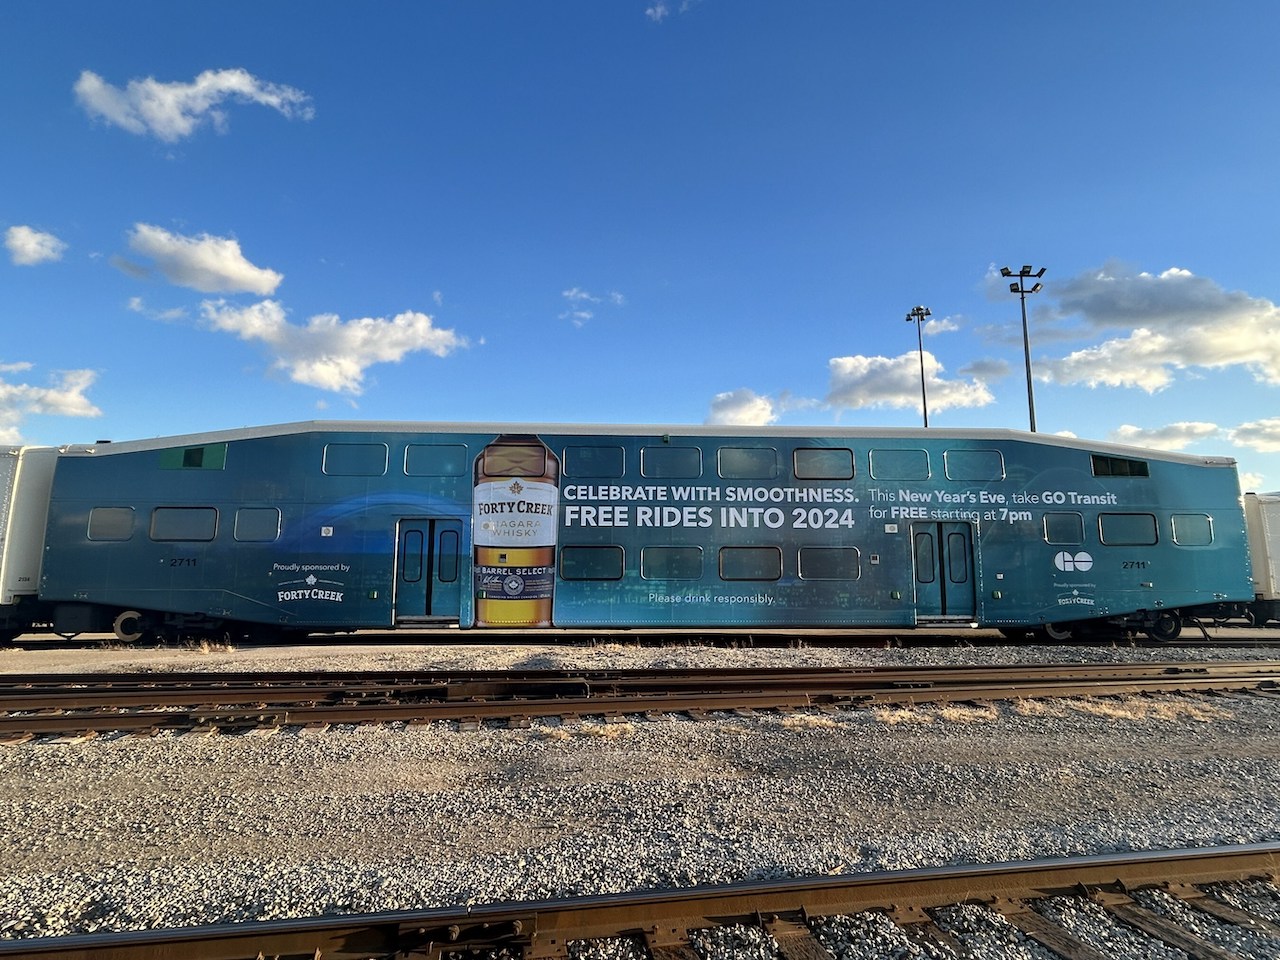 Forty Creek® Canadian Whisky and Metrolinx will provide free rides on GO Transit and UP Express on New Year's Eve. (CNW Group/Campari Group Canada)